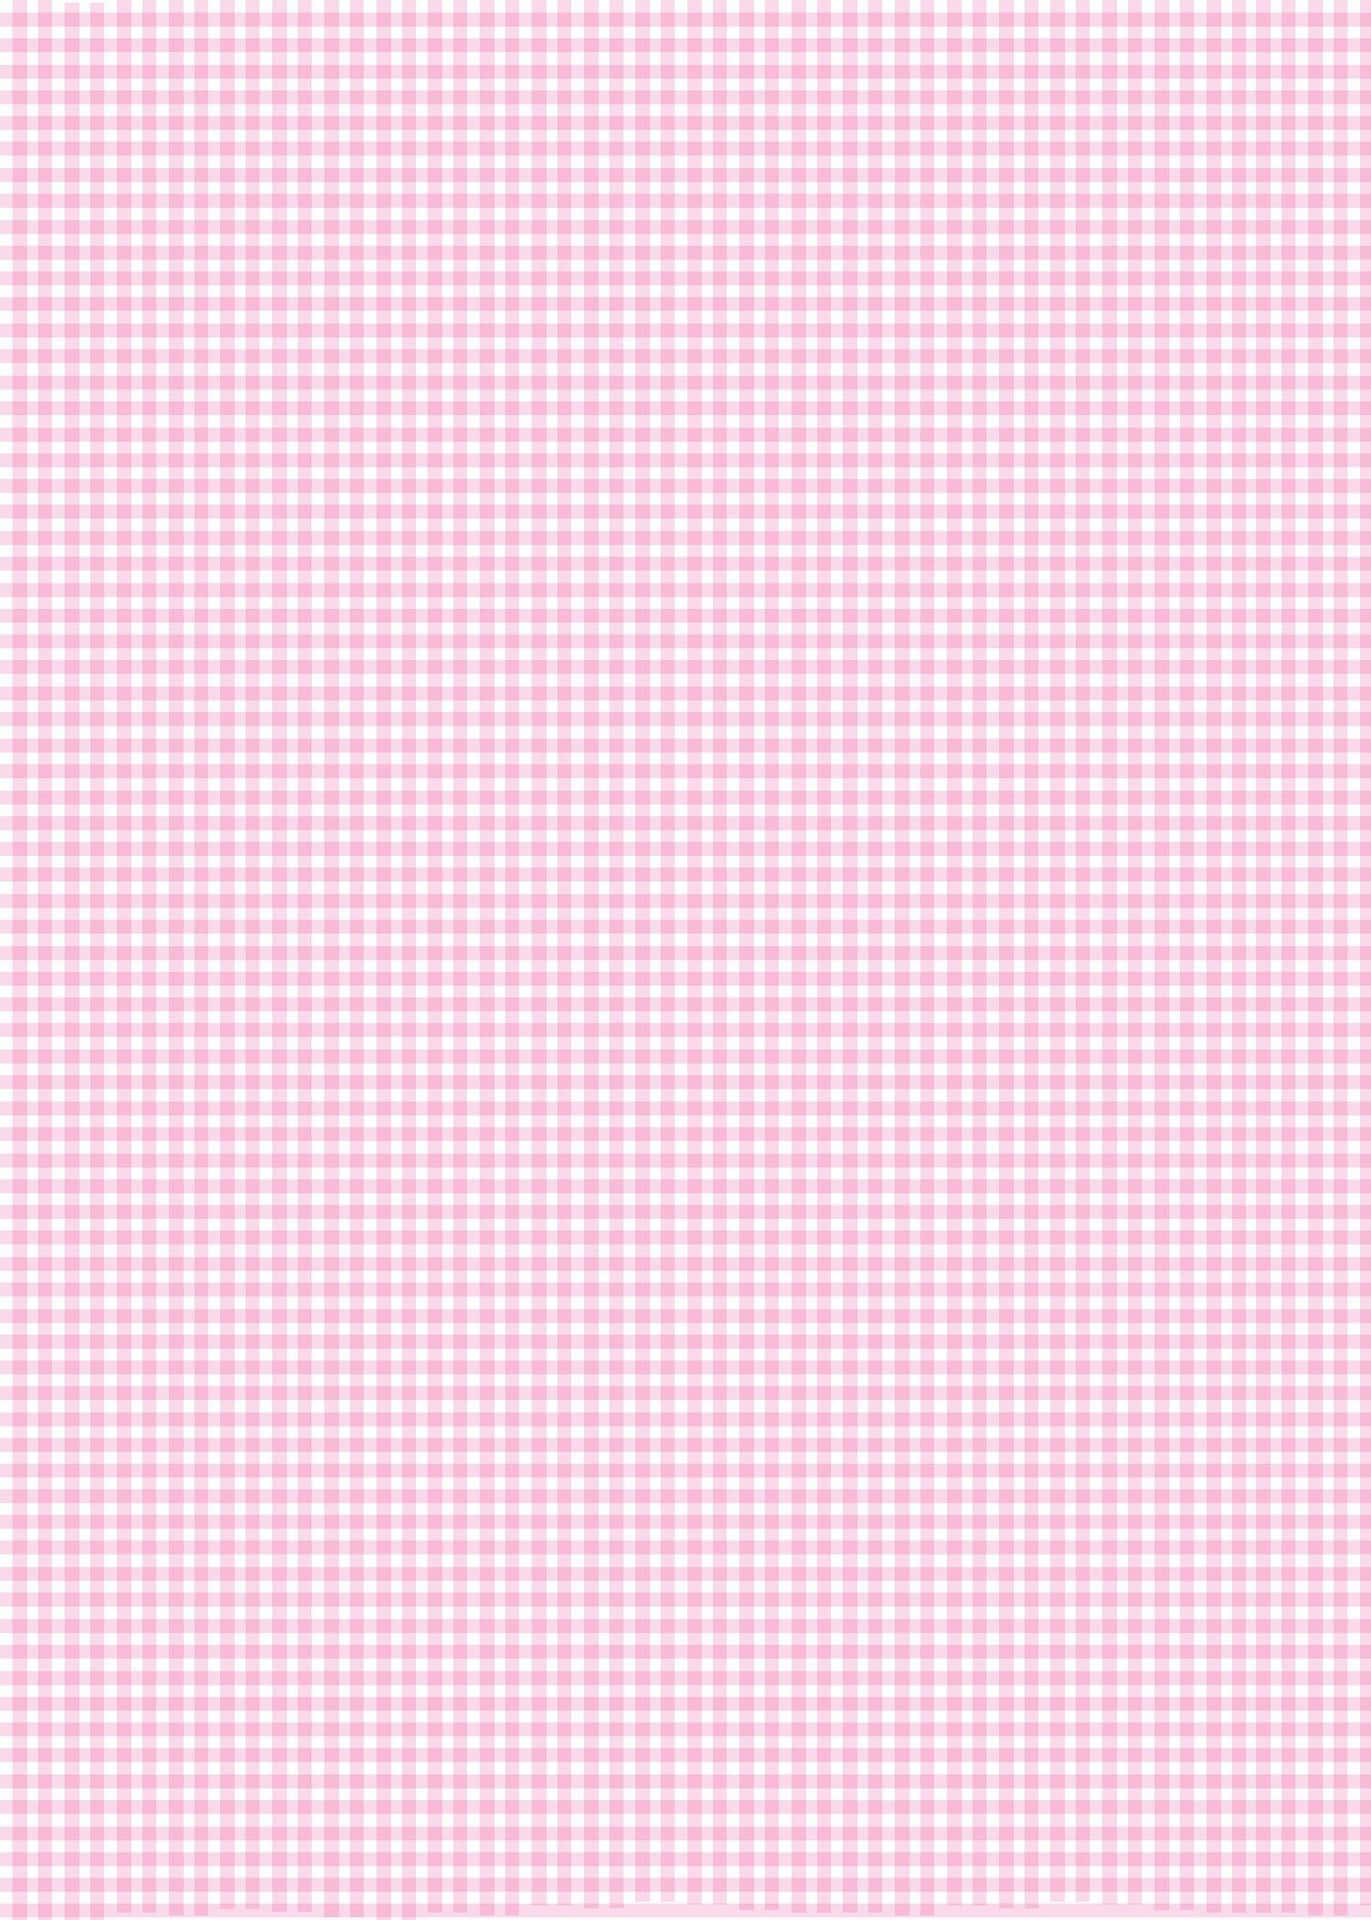 Pink Checkered Background Pink Lattice Pink Pattern Background Image And  Wallpaper for Free Download